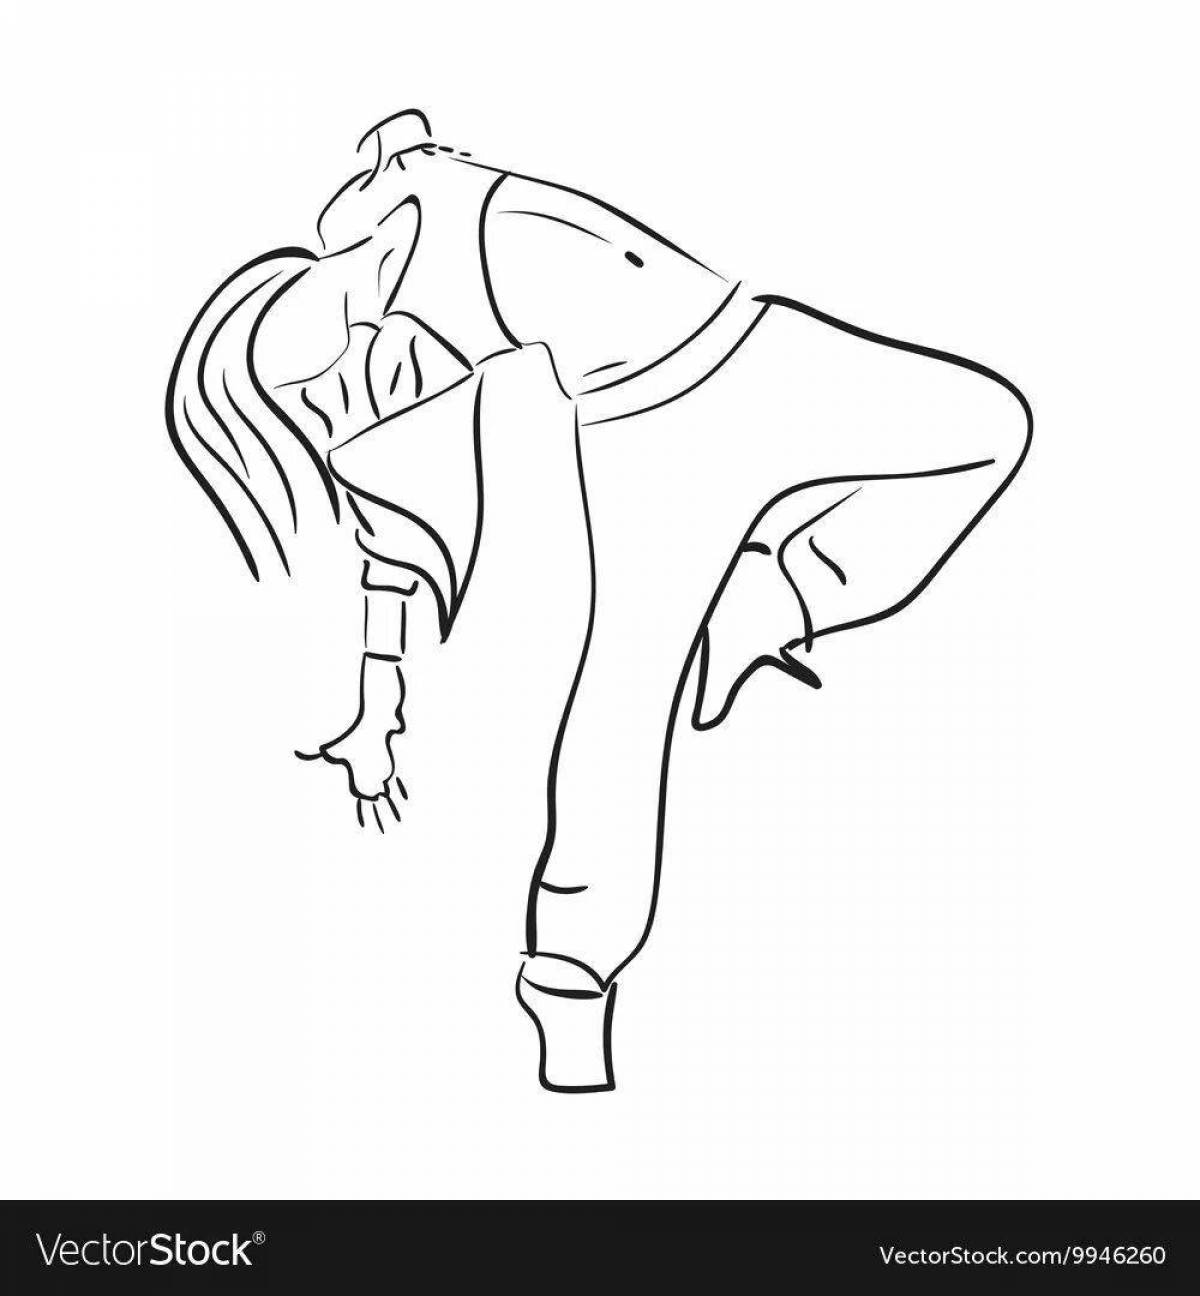 Coloring page sports dancer